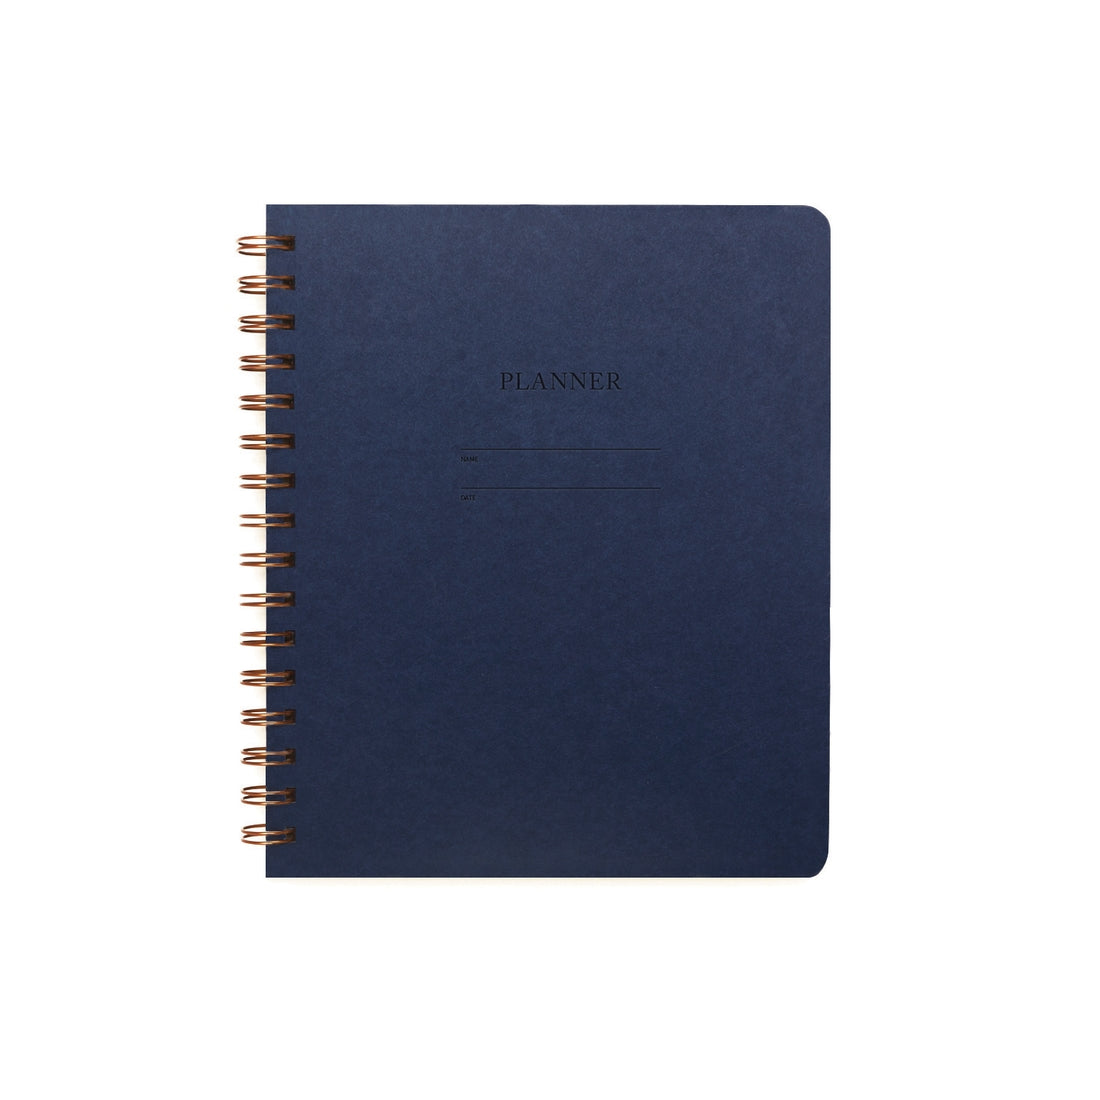 Image of dark blue cover with letter pressed text says, “Planner”. “Name” and “Date” with lines for writing. Coiled binding on left side.